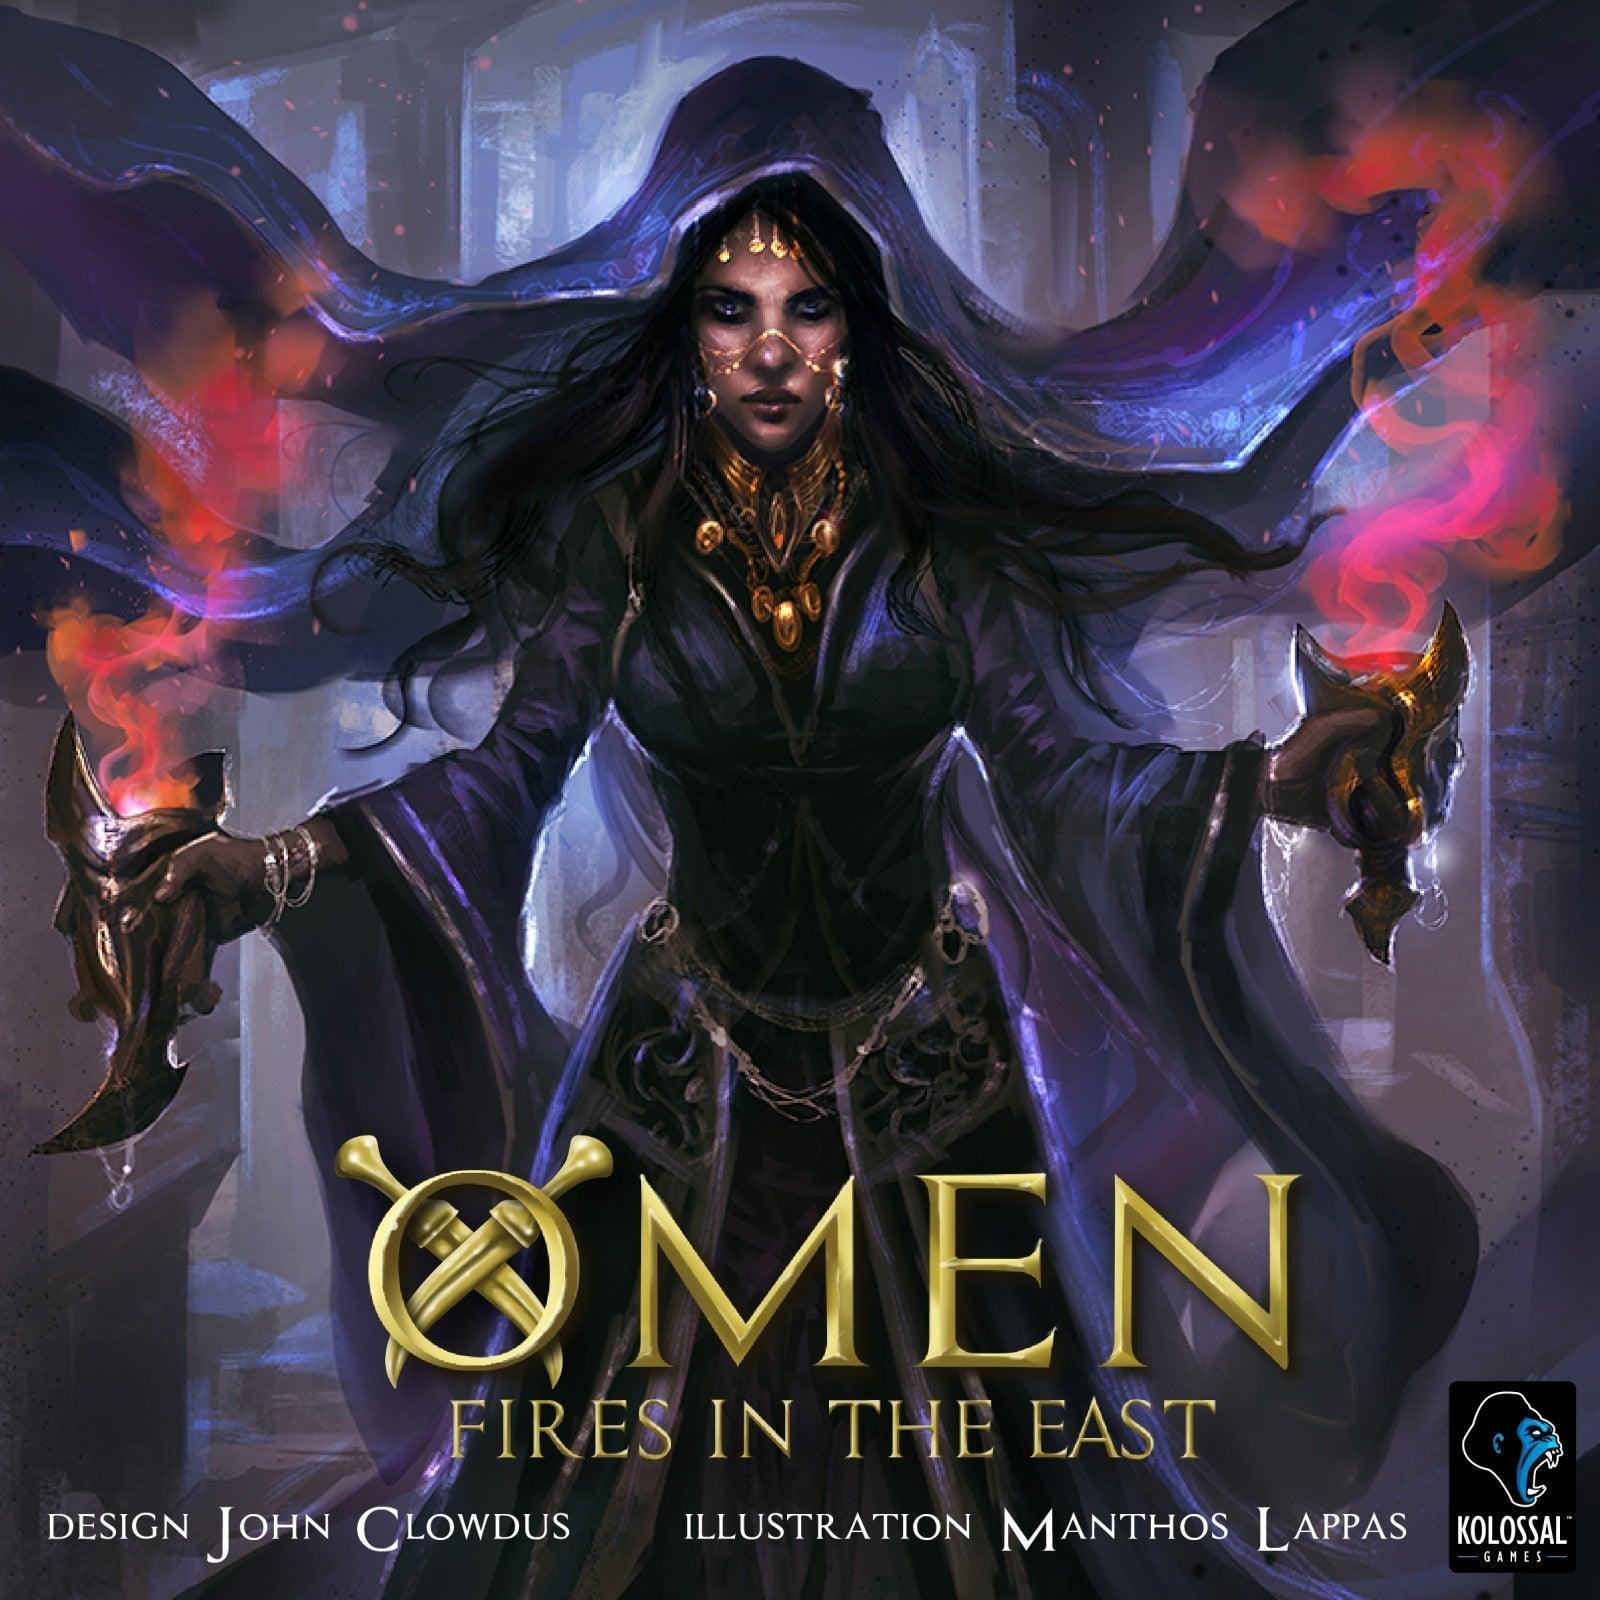 VR-68723 Omen - Fires in the East Standalone Expansion - Kolossal Games - Titan Pop Culture